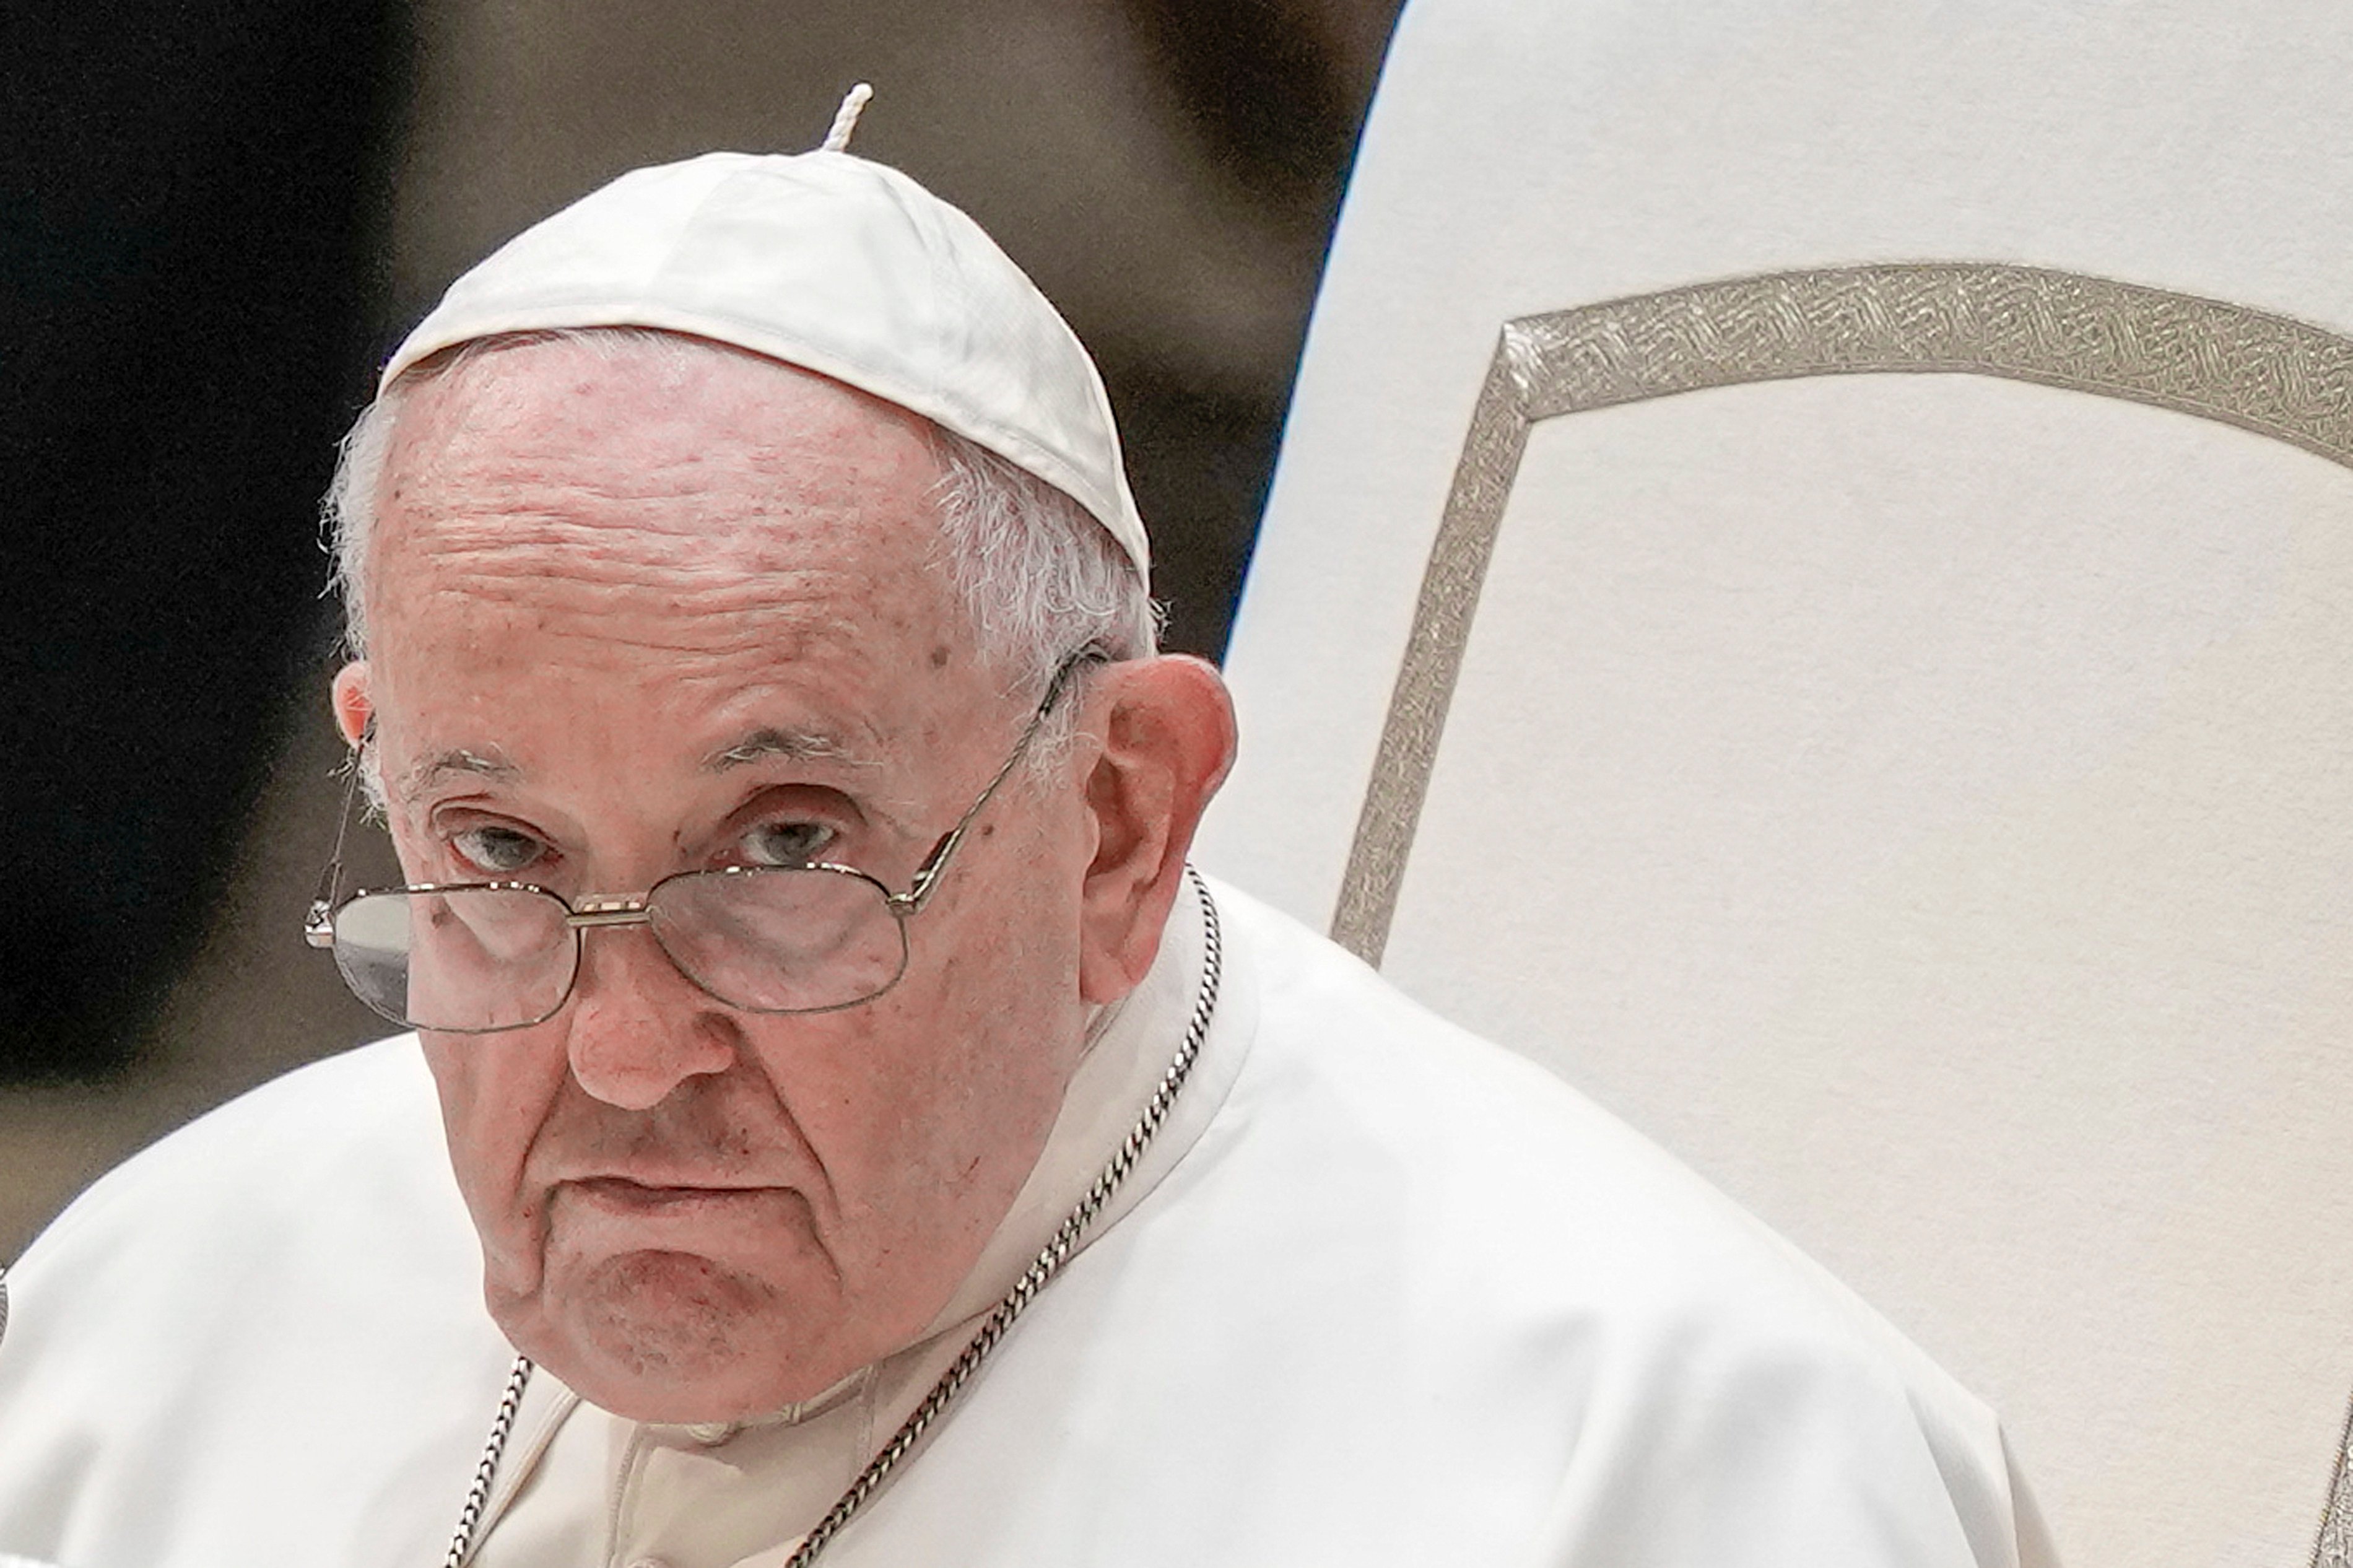 Pope Francis on Monday called for a universal ban on the “despicable” practice of surrogate motherhood, as he included the “commercialization” of pregnancy in an annual speech listing the threats to global peace and human dignity. Photo: AP